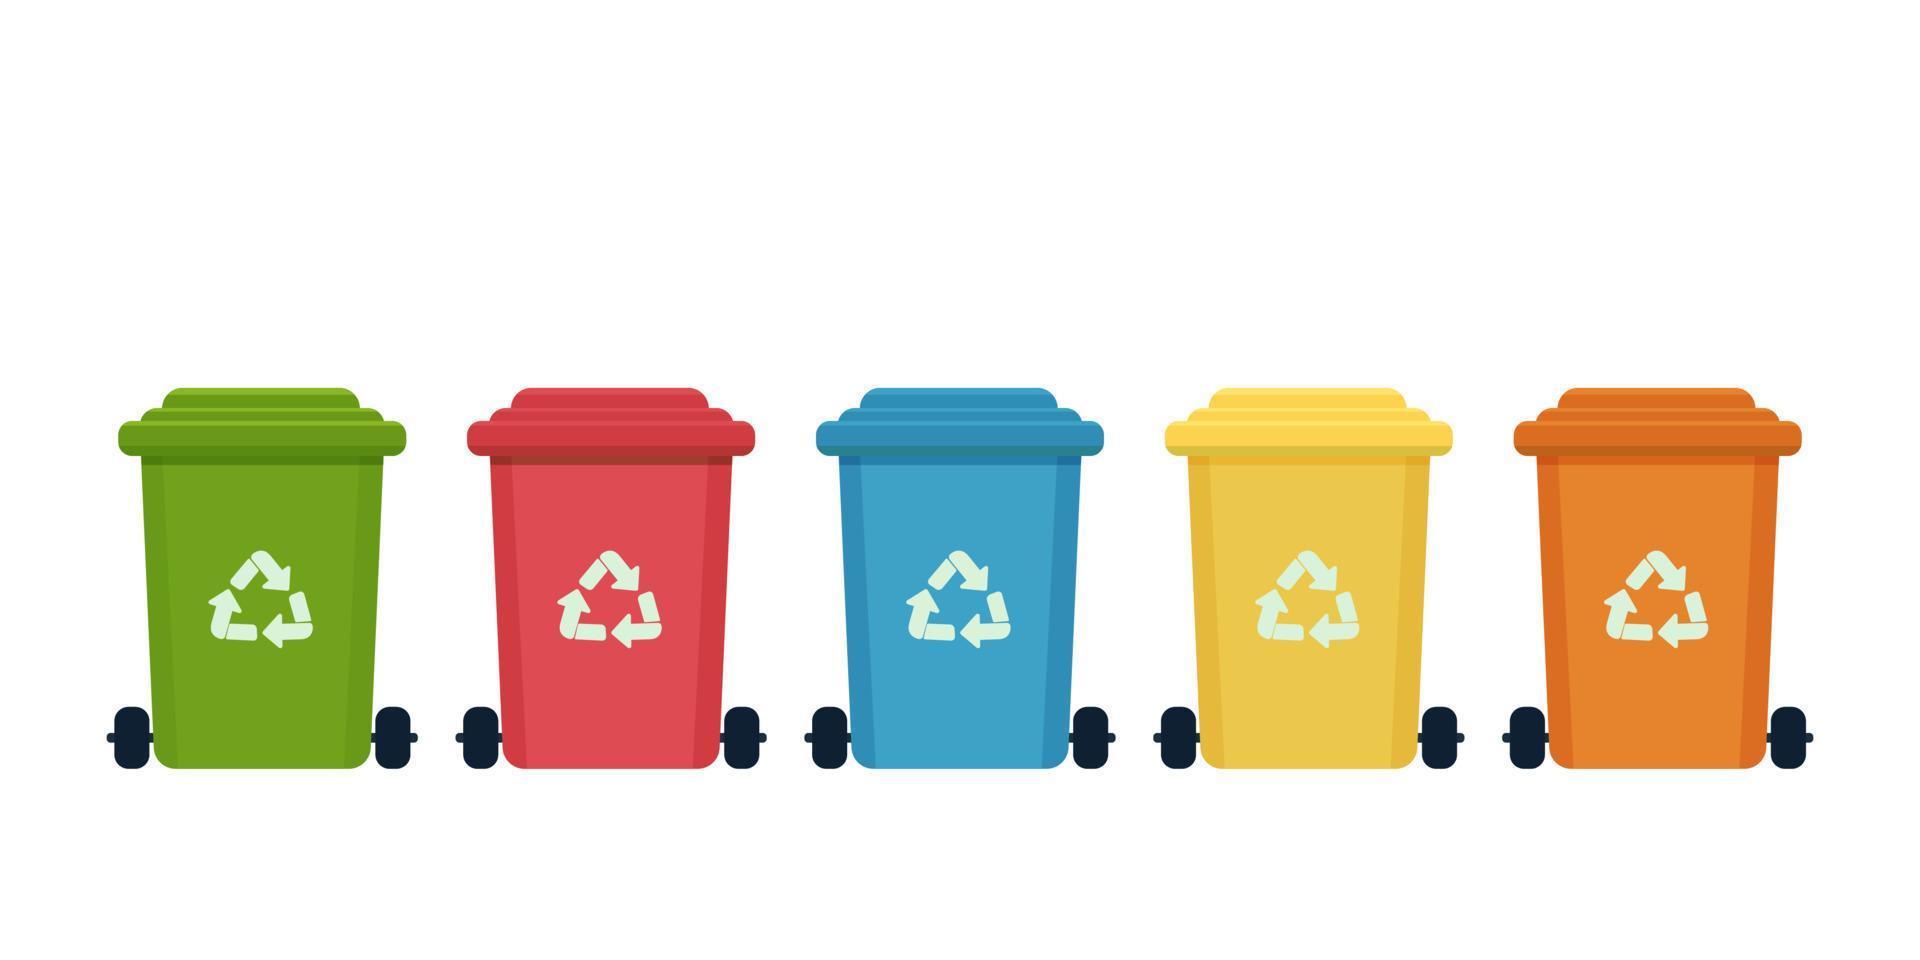 Multi colored trash cans isolated on white background. Waste bins with icons of ecological processing of products. . Vector illustration